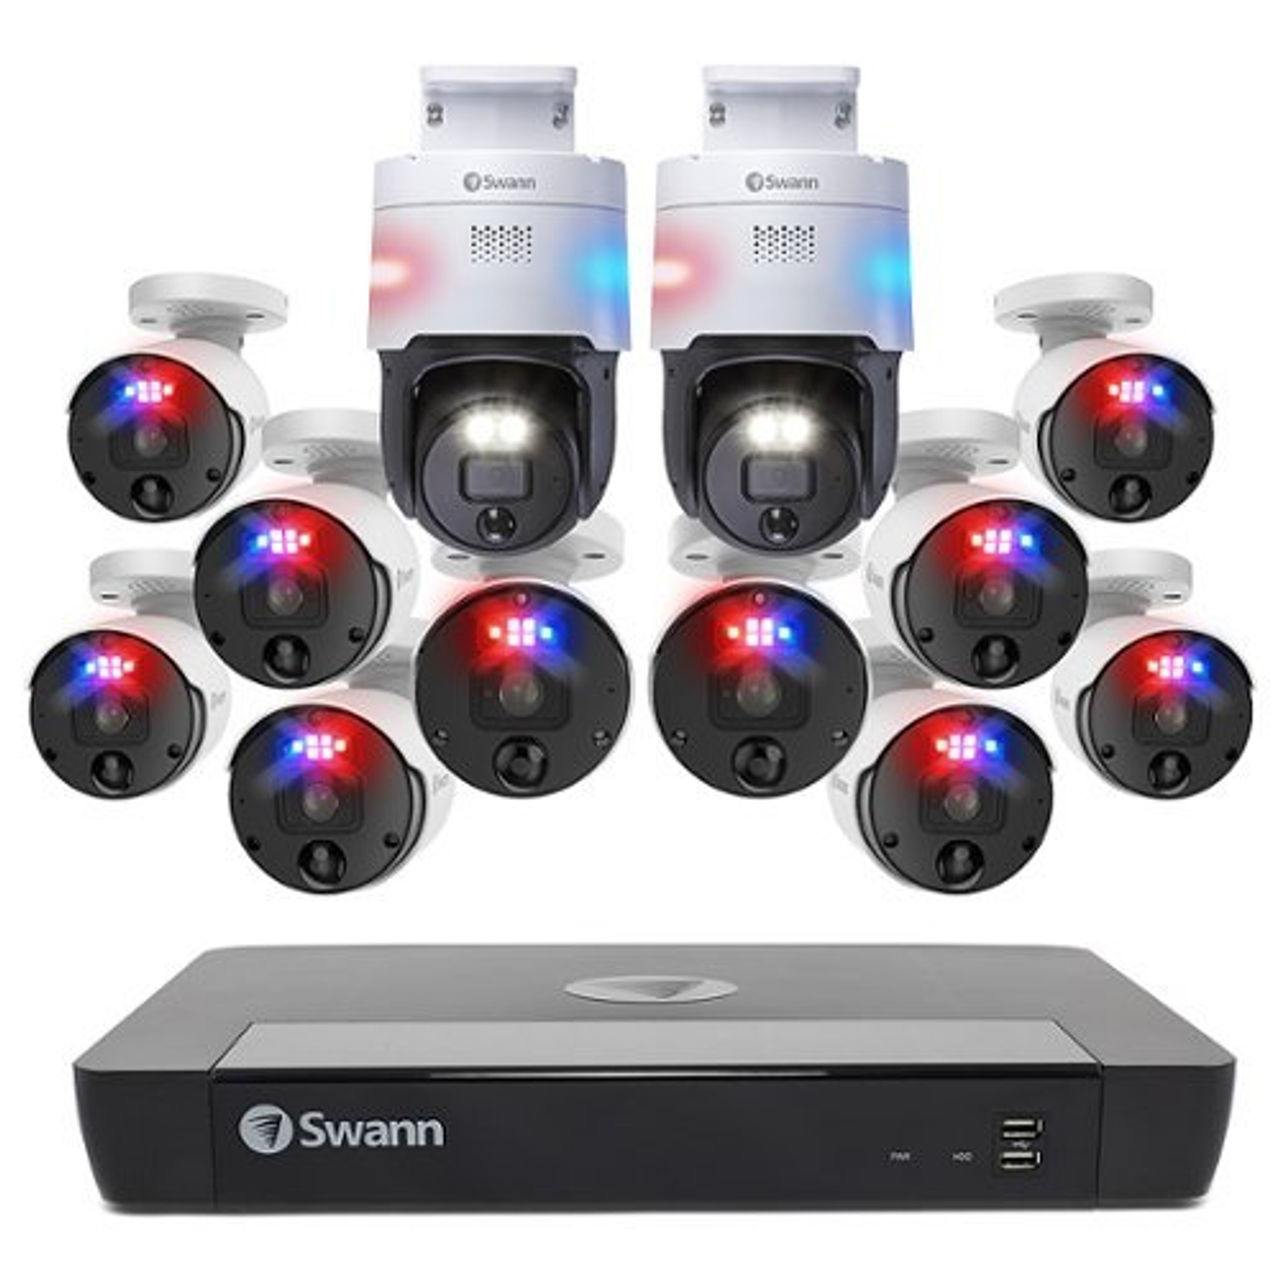 Swann - Pro Enforcer, 16-Channel, 10 Bullet Camera 12MP, 1 Pan Tilt Camera 4K, Indoor/Outdoor Wired 2TB NVR Home Security System - White